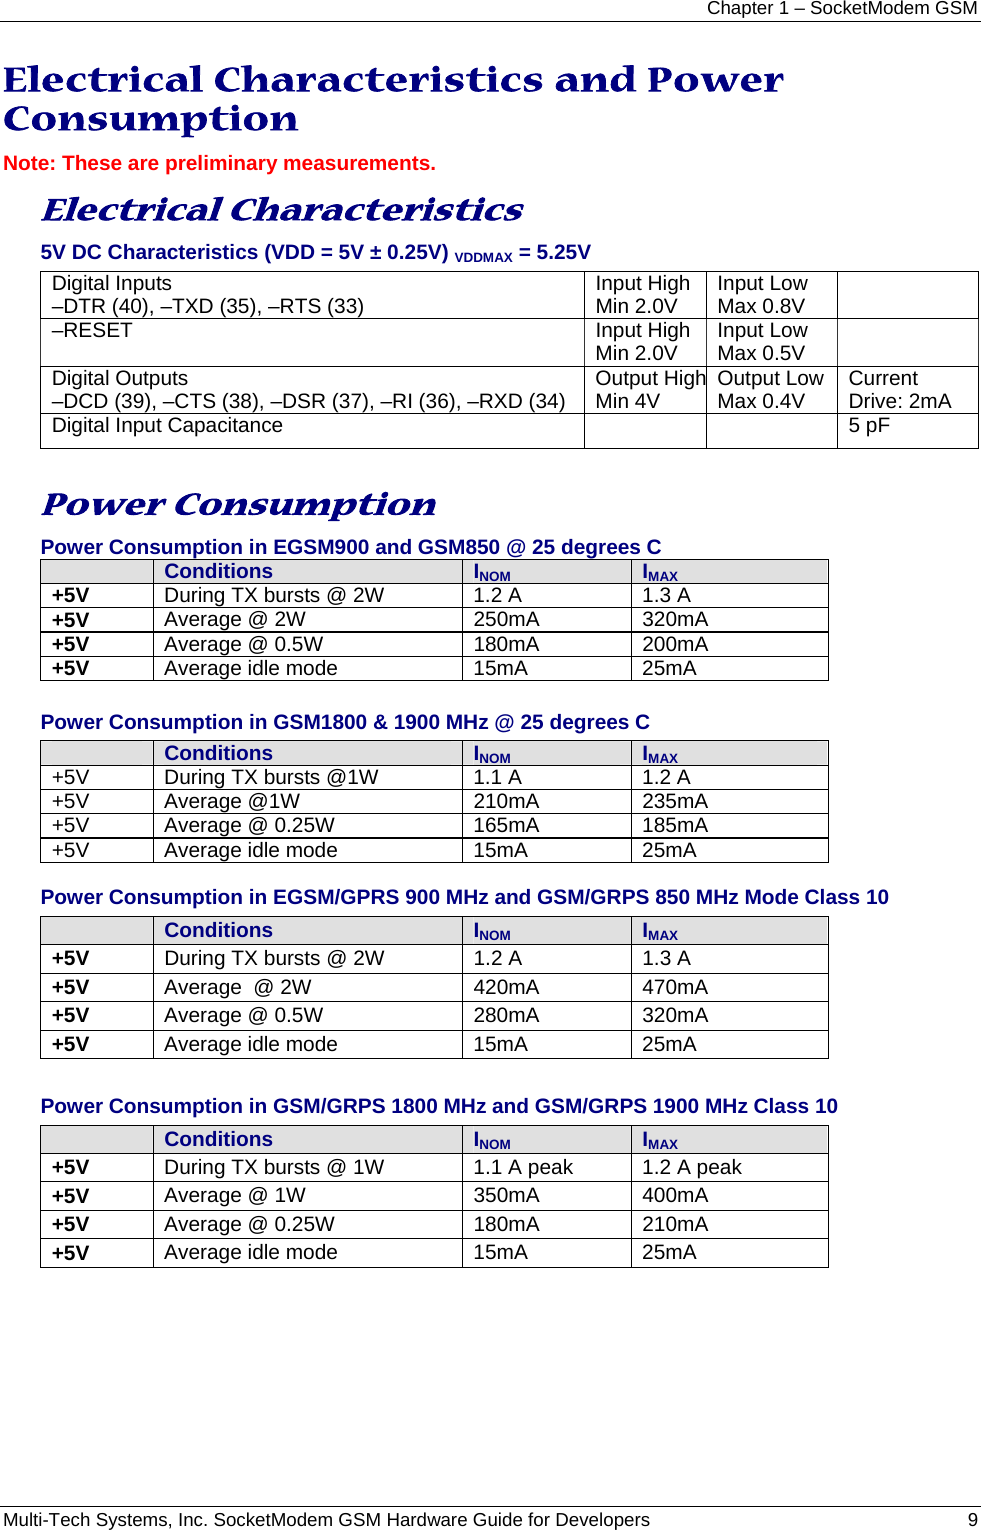 Chapter 1 – SocketModem GSM Multi-Tech Systems, Inc. SocketModem GSM Hardware Guide for Developers   9  Electrical Characteristics and Power Consumption Note: These are preliminary measurements. Electrical Characteristics 5V DC Characteristics (VDD = 5V ± 0.25V) VDDMAX = 5.25V   Digital Inputs –DTR (40), –TXD (35), –RTS (33)  Input High Min 2.0V  Input Low Max 0.8V   –RESET Input High Min 2.0V  Input Low Max 0.5V   Digital Outputs –DCD (39), –CTS (38), –DSR (37), –RI (36), –RXD (34)  Output HighMin 4V  Output Low Max 0.4V  Current Drive: 2mA Digital Input Capacitance      5 pF  Power Consumption Power Consumption in EGSM900 and GSM850 @ 25 degrees C  Conditions  INOM  IMAX +5V  During TX bursts @ 2W  1.2 A  1.3 A +5V  Average @ 2W  250mA  320mA +5V  Average @ 0.5W  180mA  200mA +5V  Average idle mode  15mA  25mA  Power Consumption in GSM1800 &amp; 1900 MHz @ 25 degrees C  Conditions  INOM  IMAX +5V  During TX bursts @1W  1.1 A   1.2 A +5V Average @1W  210mA  235mA +5V Average @ 0.25W  165mA  185mA +5V  Average idle mode  15mA  25mA  Power Consumption in EGSM/GPRS 900 MHz and GSM/GRPS 850 MHz Mode Class 10  Conditions  INOM  IMAX +5V  During TX bursts @ 2W  1.2 A   1.3 A  +5V  Average  @ 2W  420mA  470mA +5V  Average @ 0.5W  280mA  320mA +5V  Average idle mode  15mA  25mA  Power Consumption in GSM/GRPS 1800 MHz and GSM/GRPS 1900 MHz Class 10  Conditions  INOM  IMAX +5V  During TX bursts @ 1W  1.1 A peak  1.2 A peak +5V  Average @ 1W  350mA  400mA +5V  Average @ 0.25W  180mA  210mA +5V  Average idle mode  15mA  25mA  